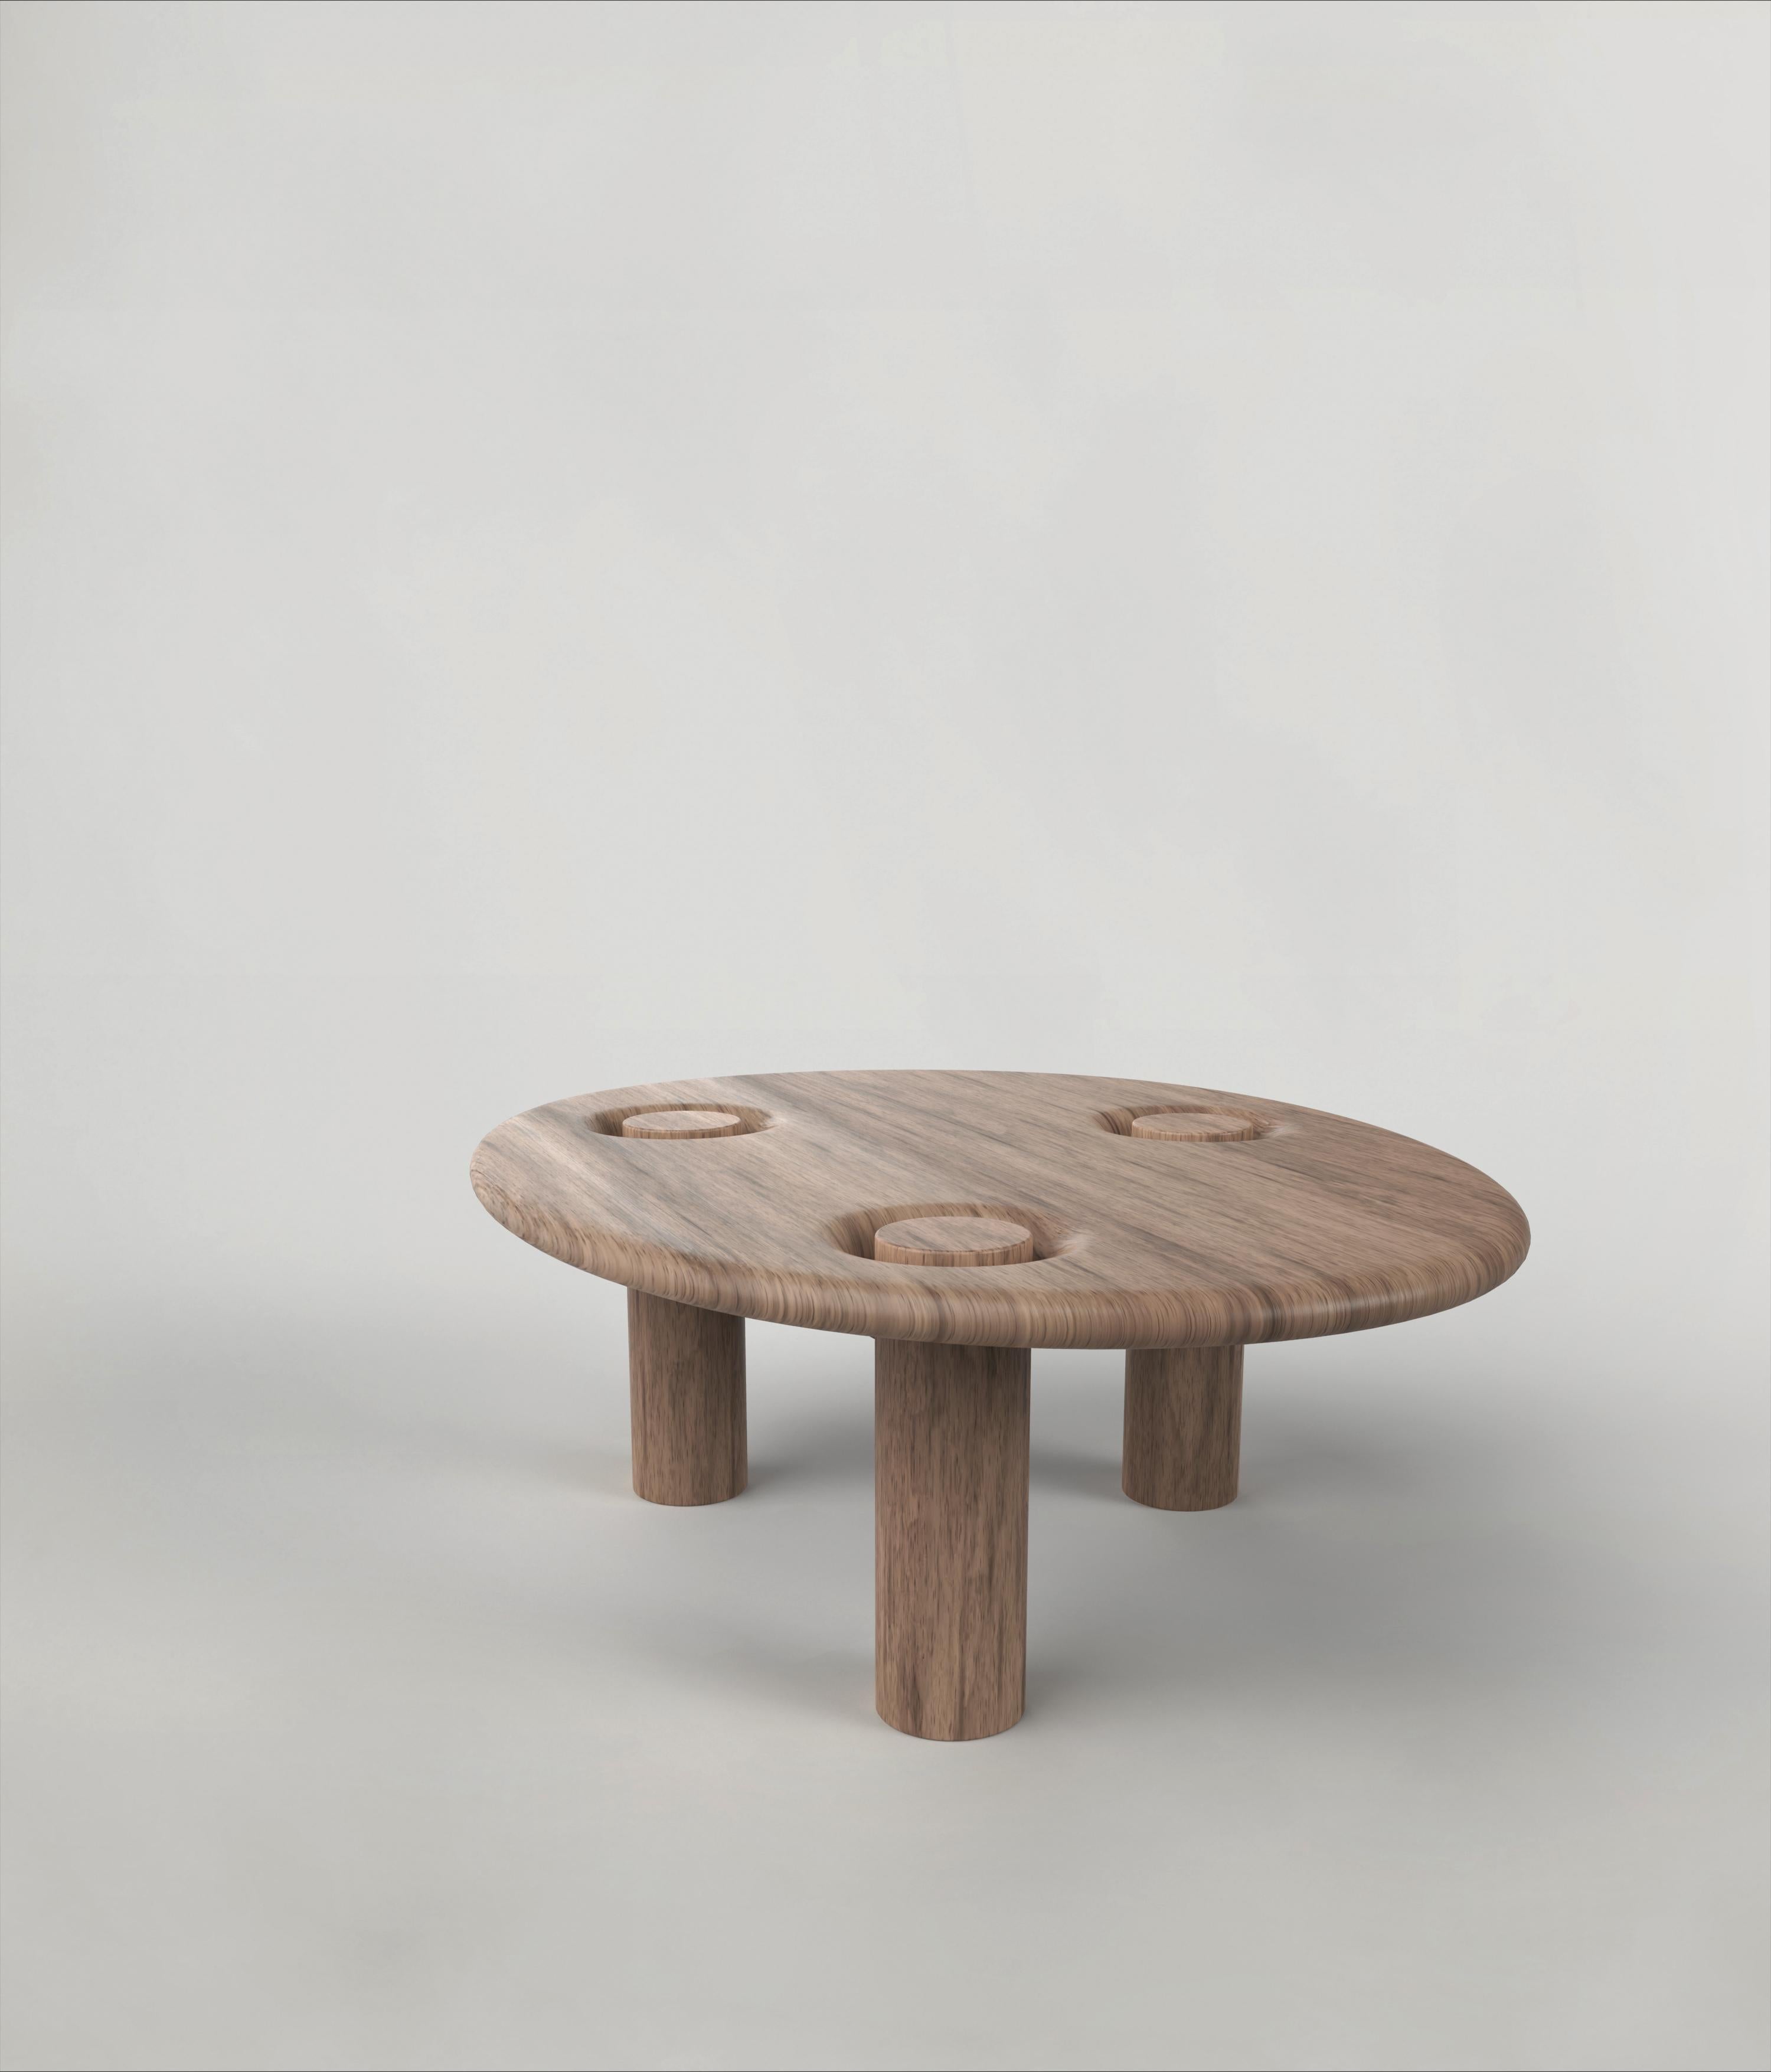 Ash Contemporary LimitedEdition Signed Wood Low Table, Asido V1 by Edizione Limitata For Sale